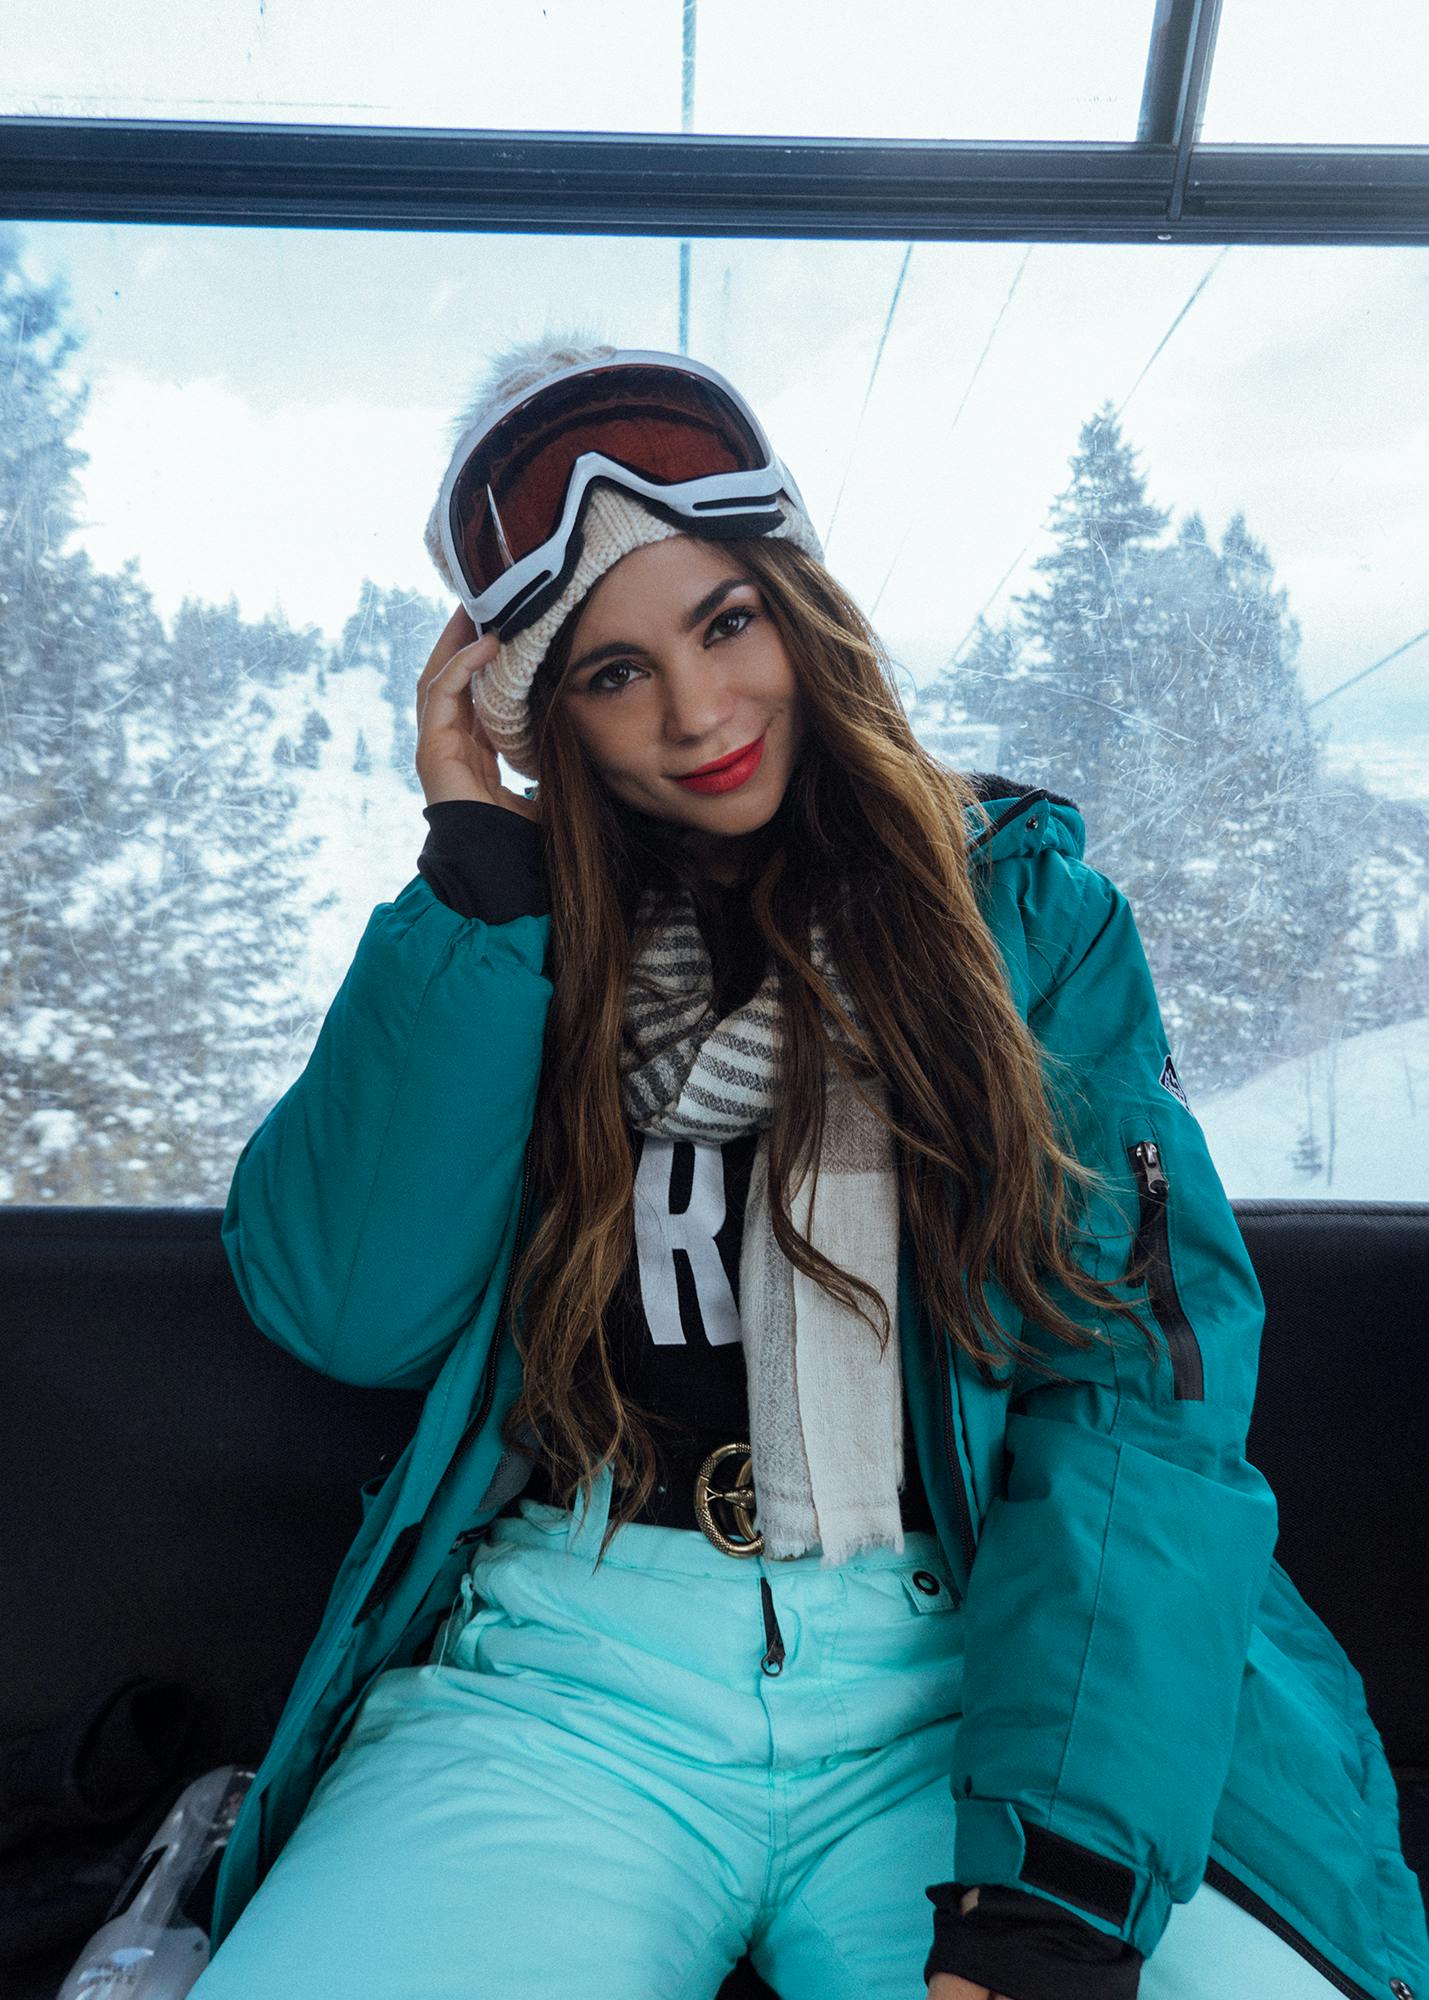 Need Affordable Snow Clothes? How to Get a Complete Ski Outfit for ...